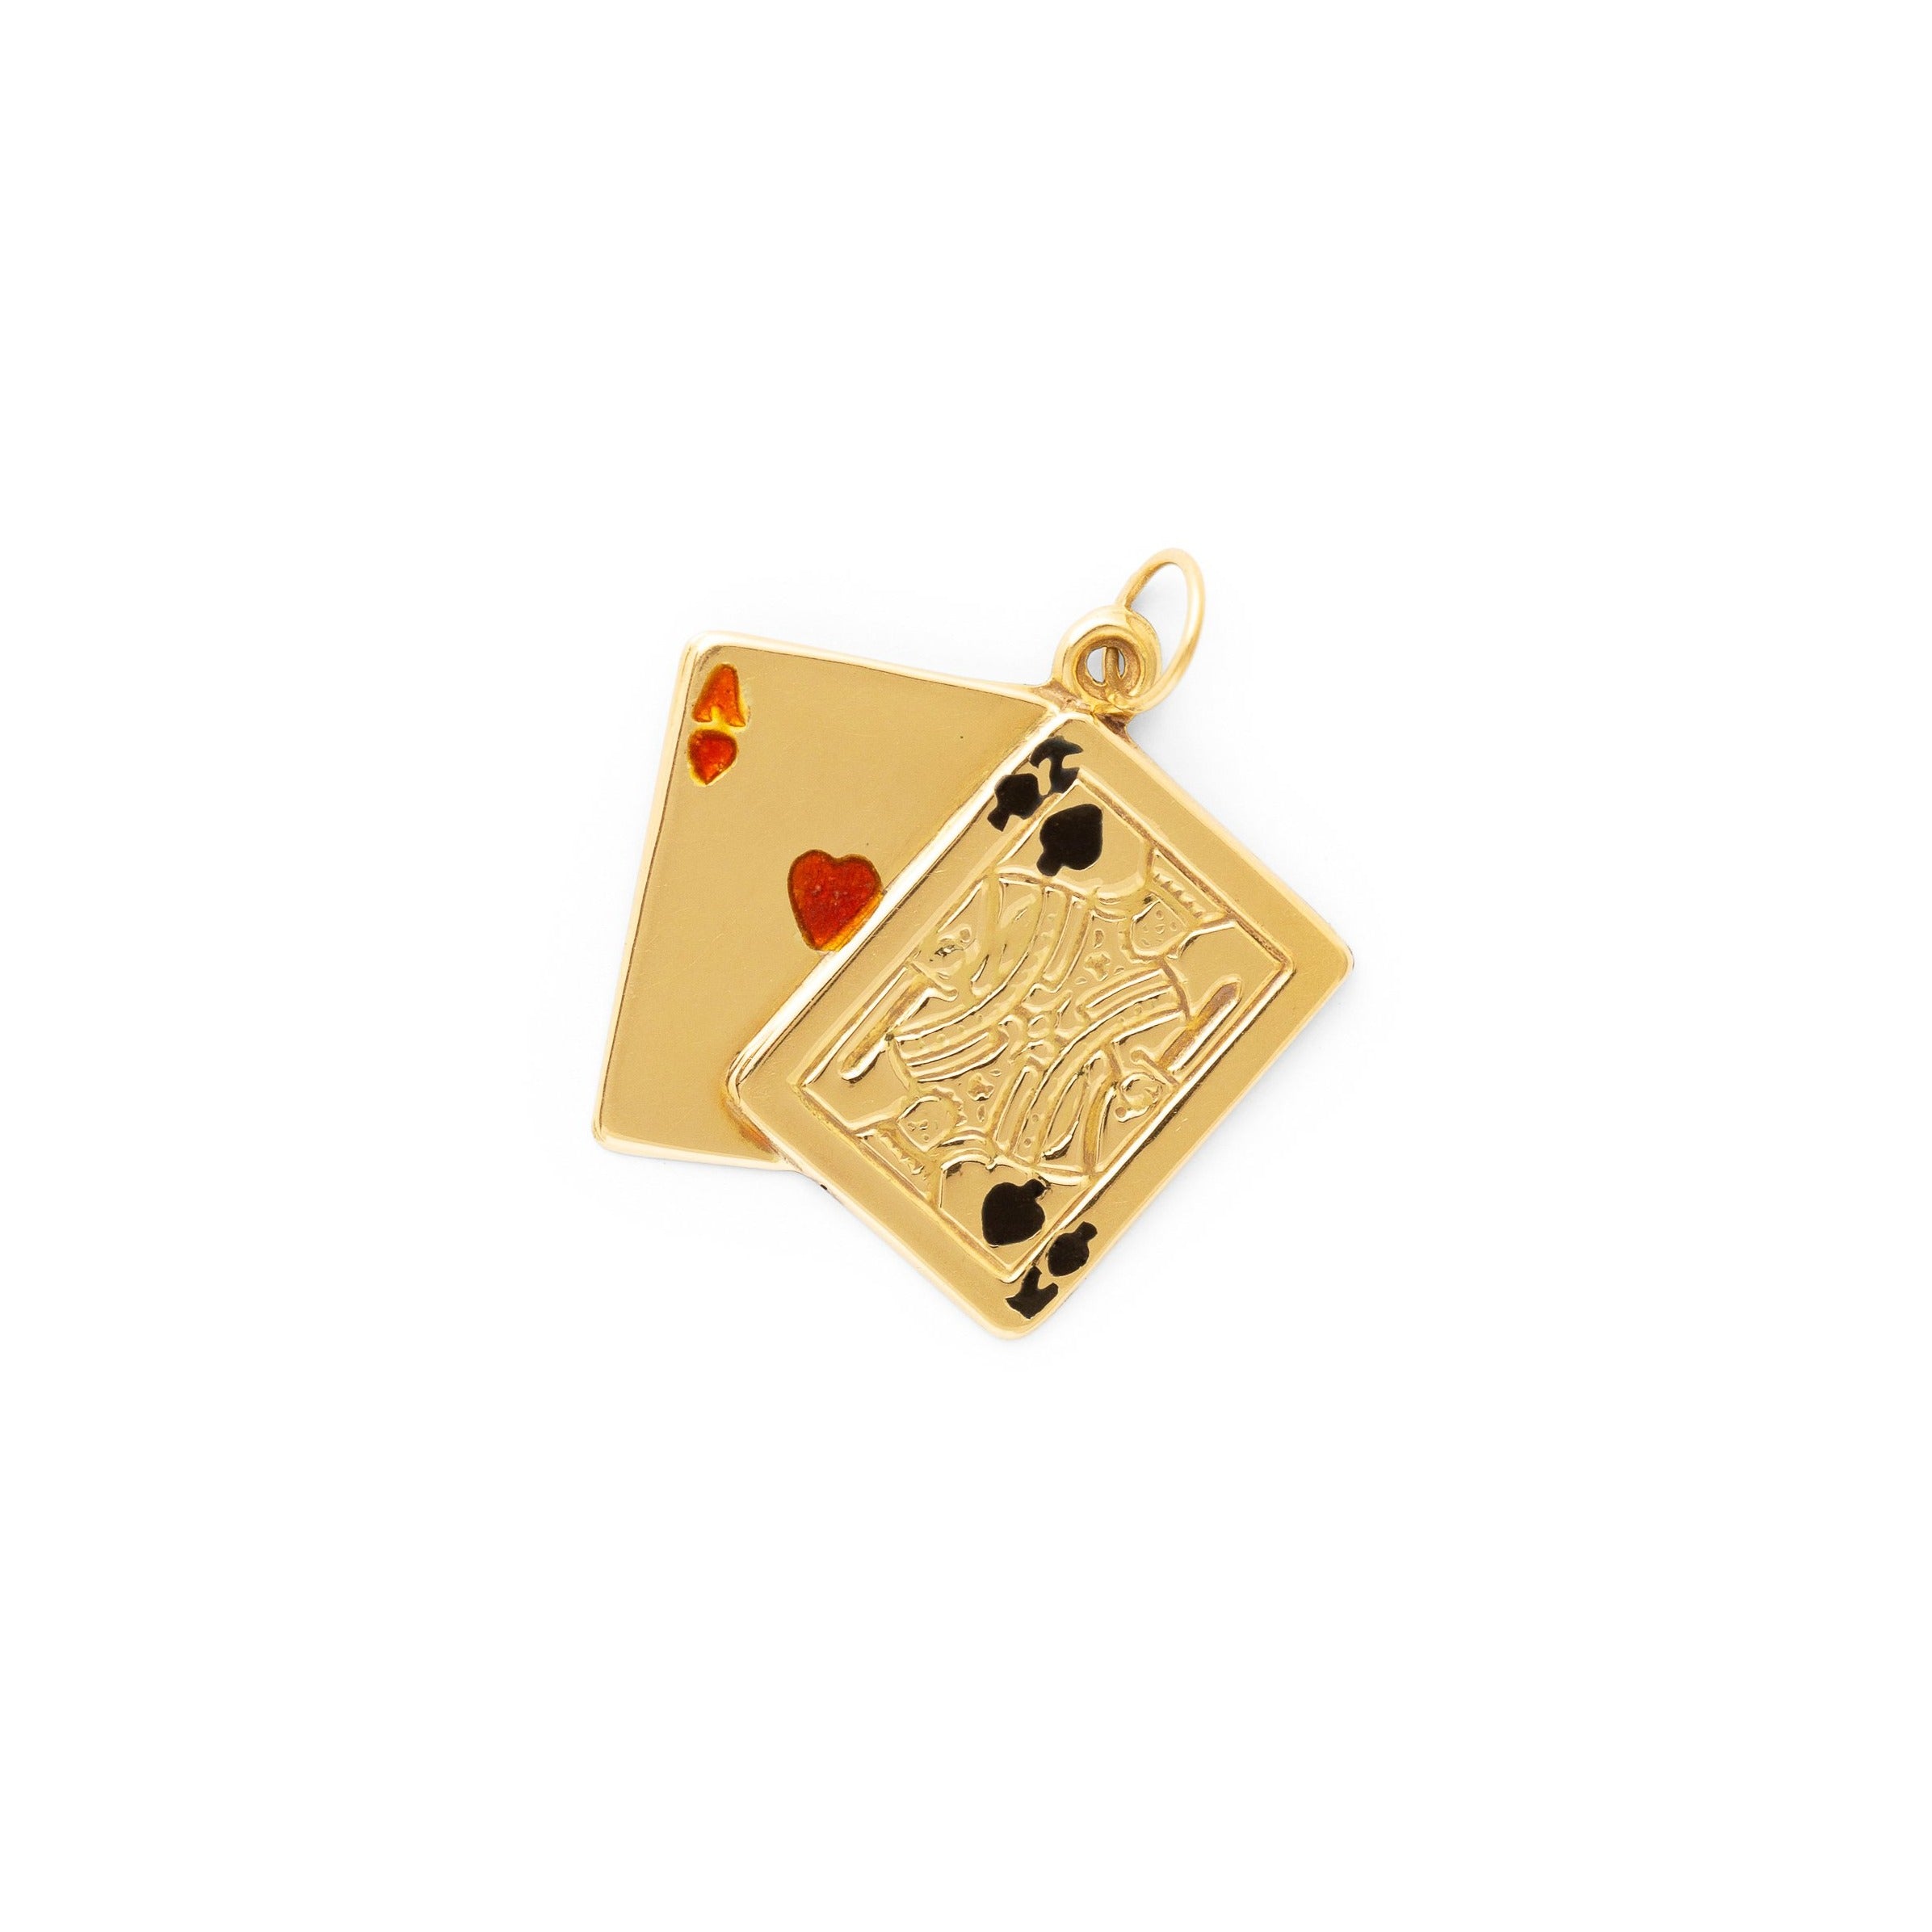 "21" 14k gold and enamel card charm